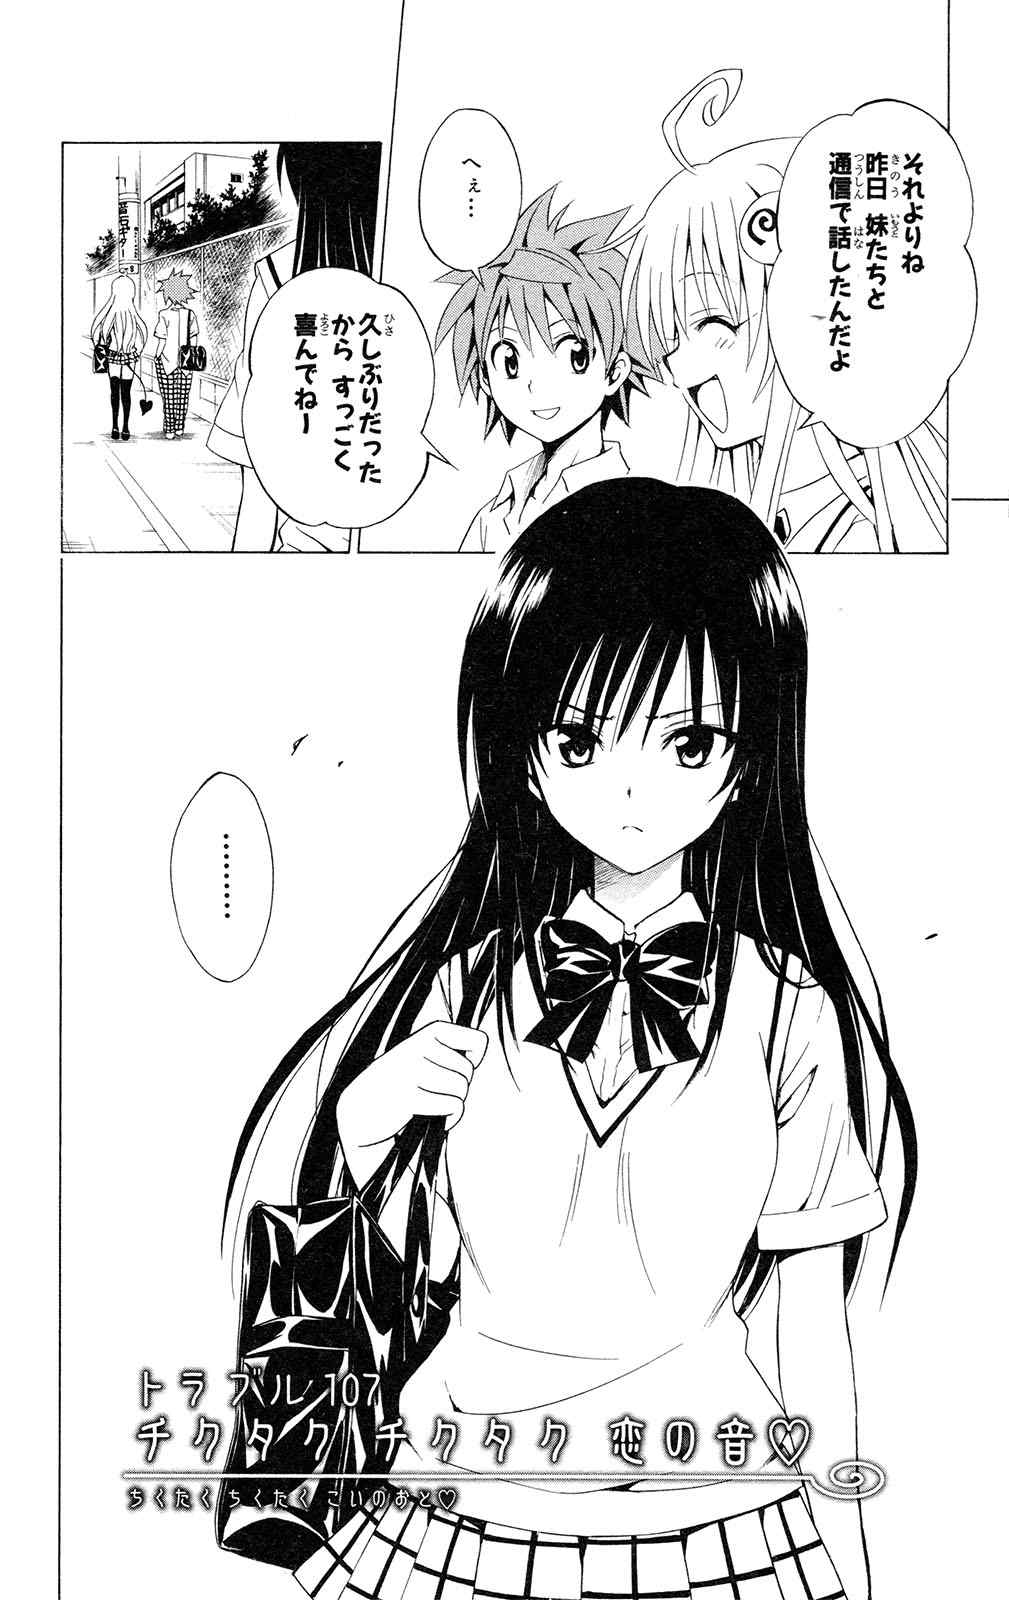 《To LOVEるとらぶる》漫画 To LOVE 13卷